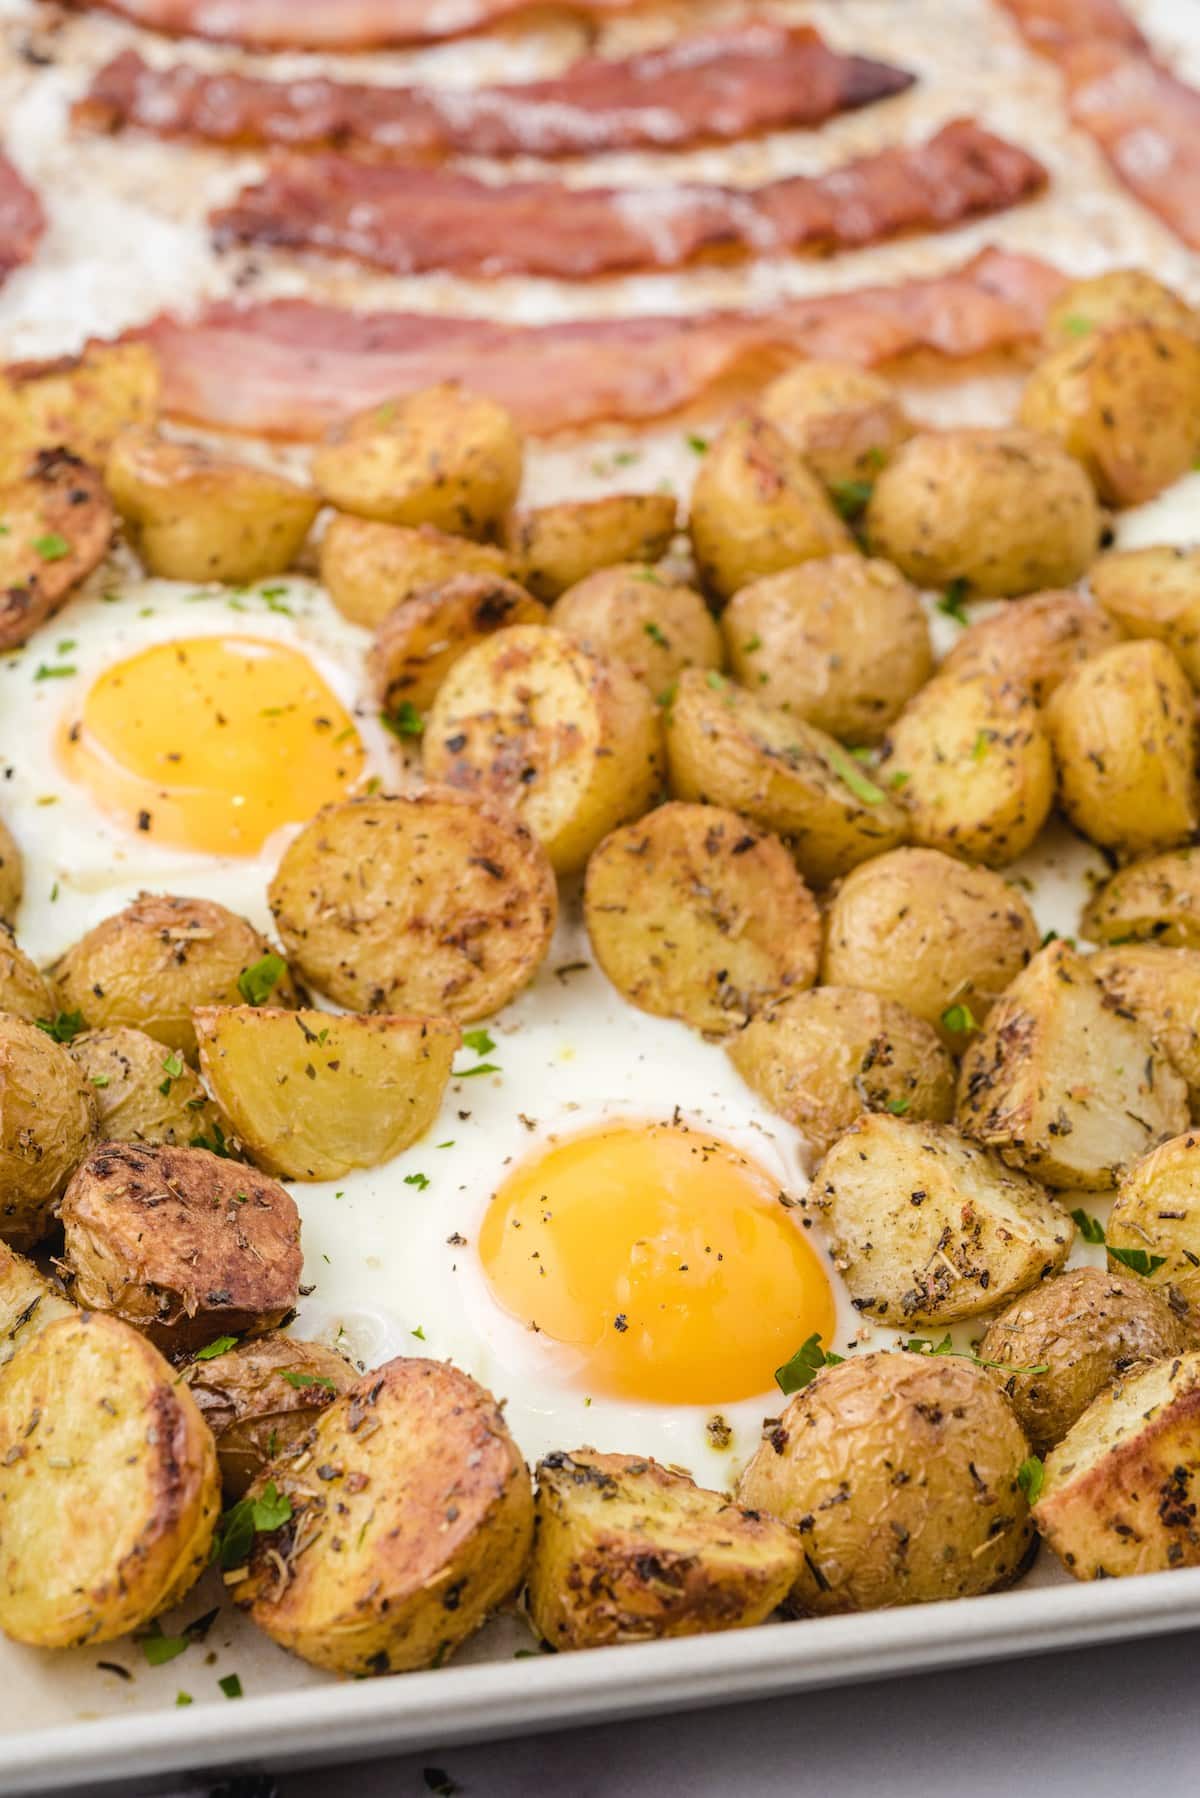 sunny side egg with potatoes